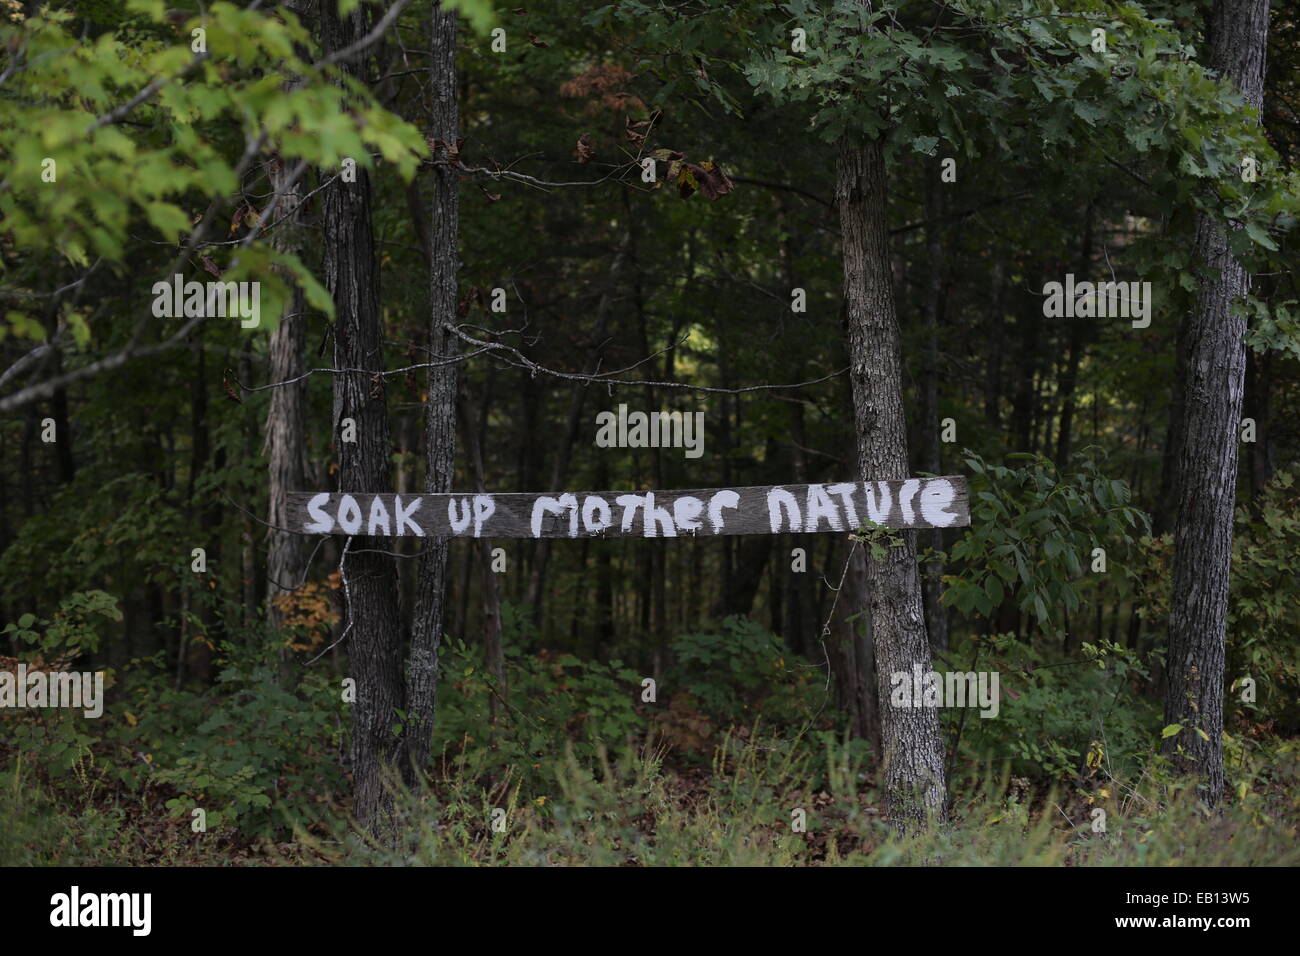 A sign in a forest at Top of the Rock in Branson, Missouri,  reading 'Soak up mother nature'. Stock Photo